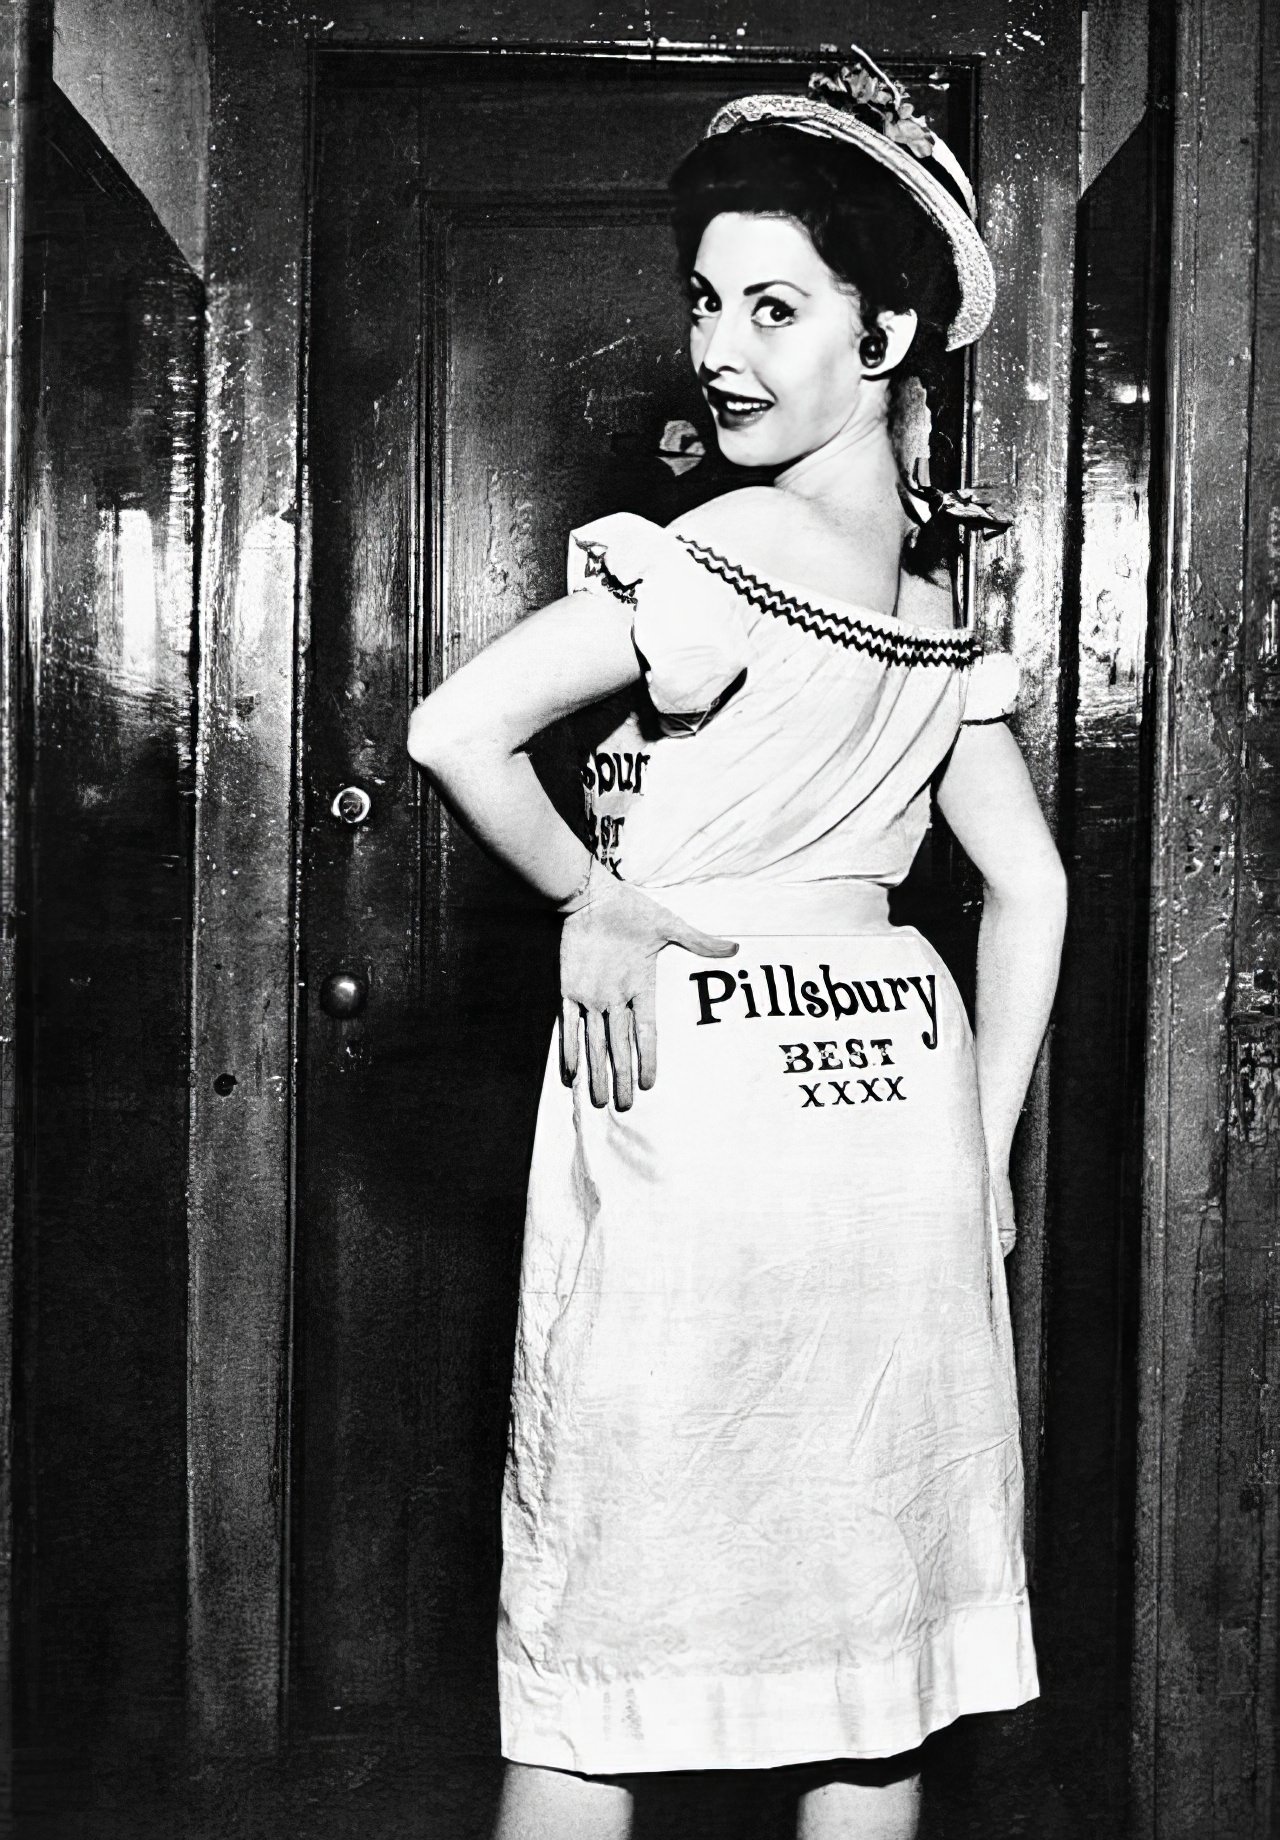 How Flour Sack Dresses Became the Emblem of Thrifty Fashions During the Great Depression